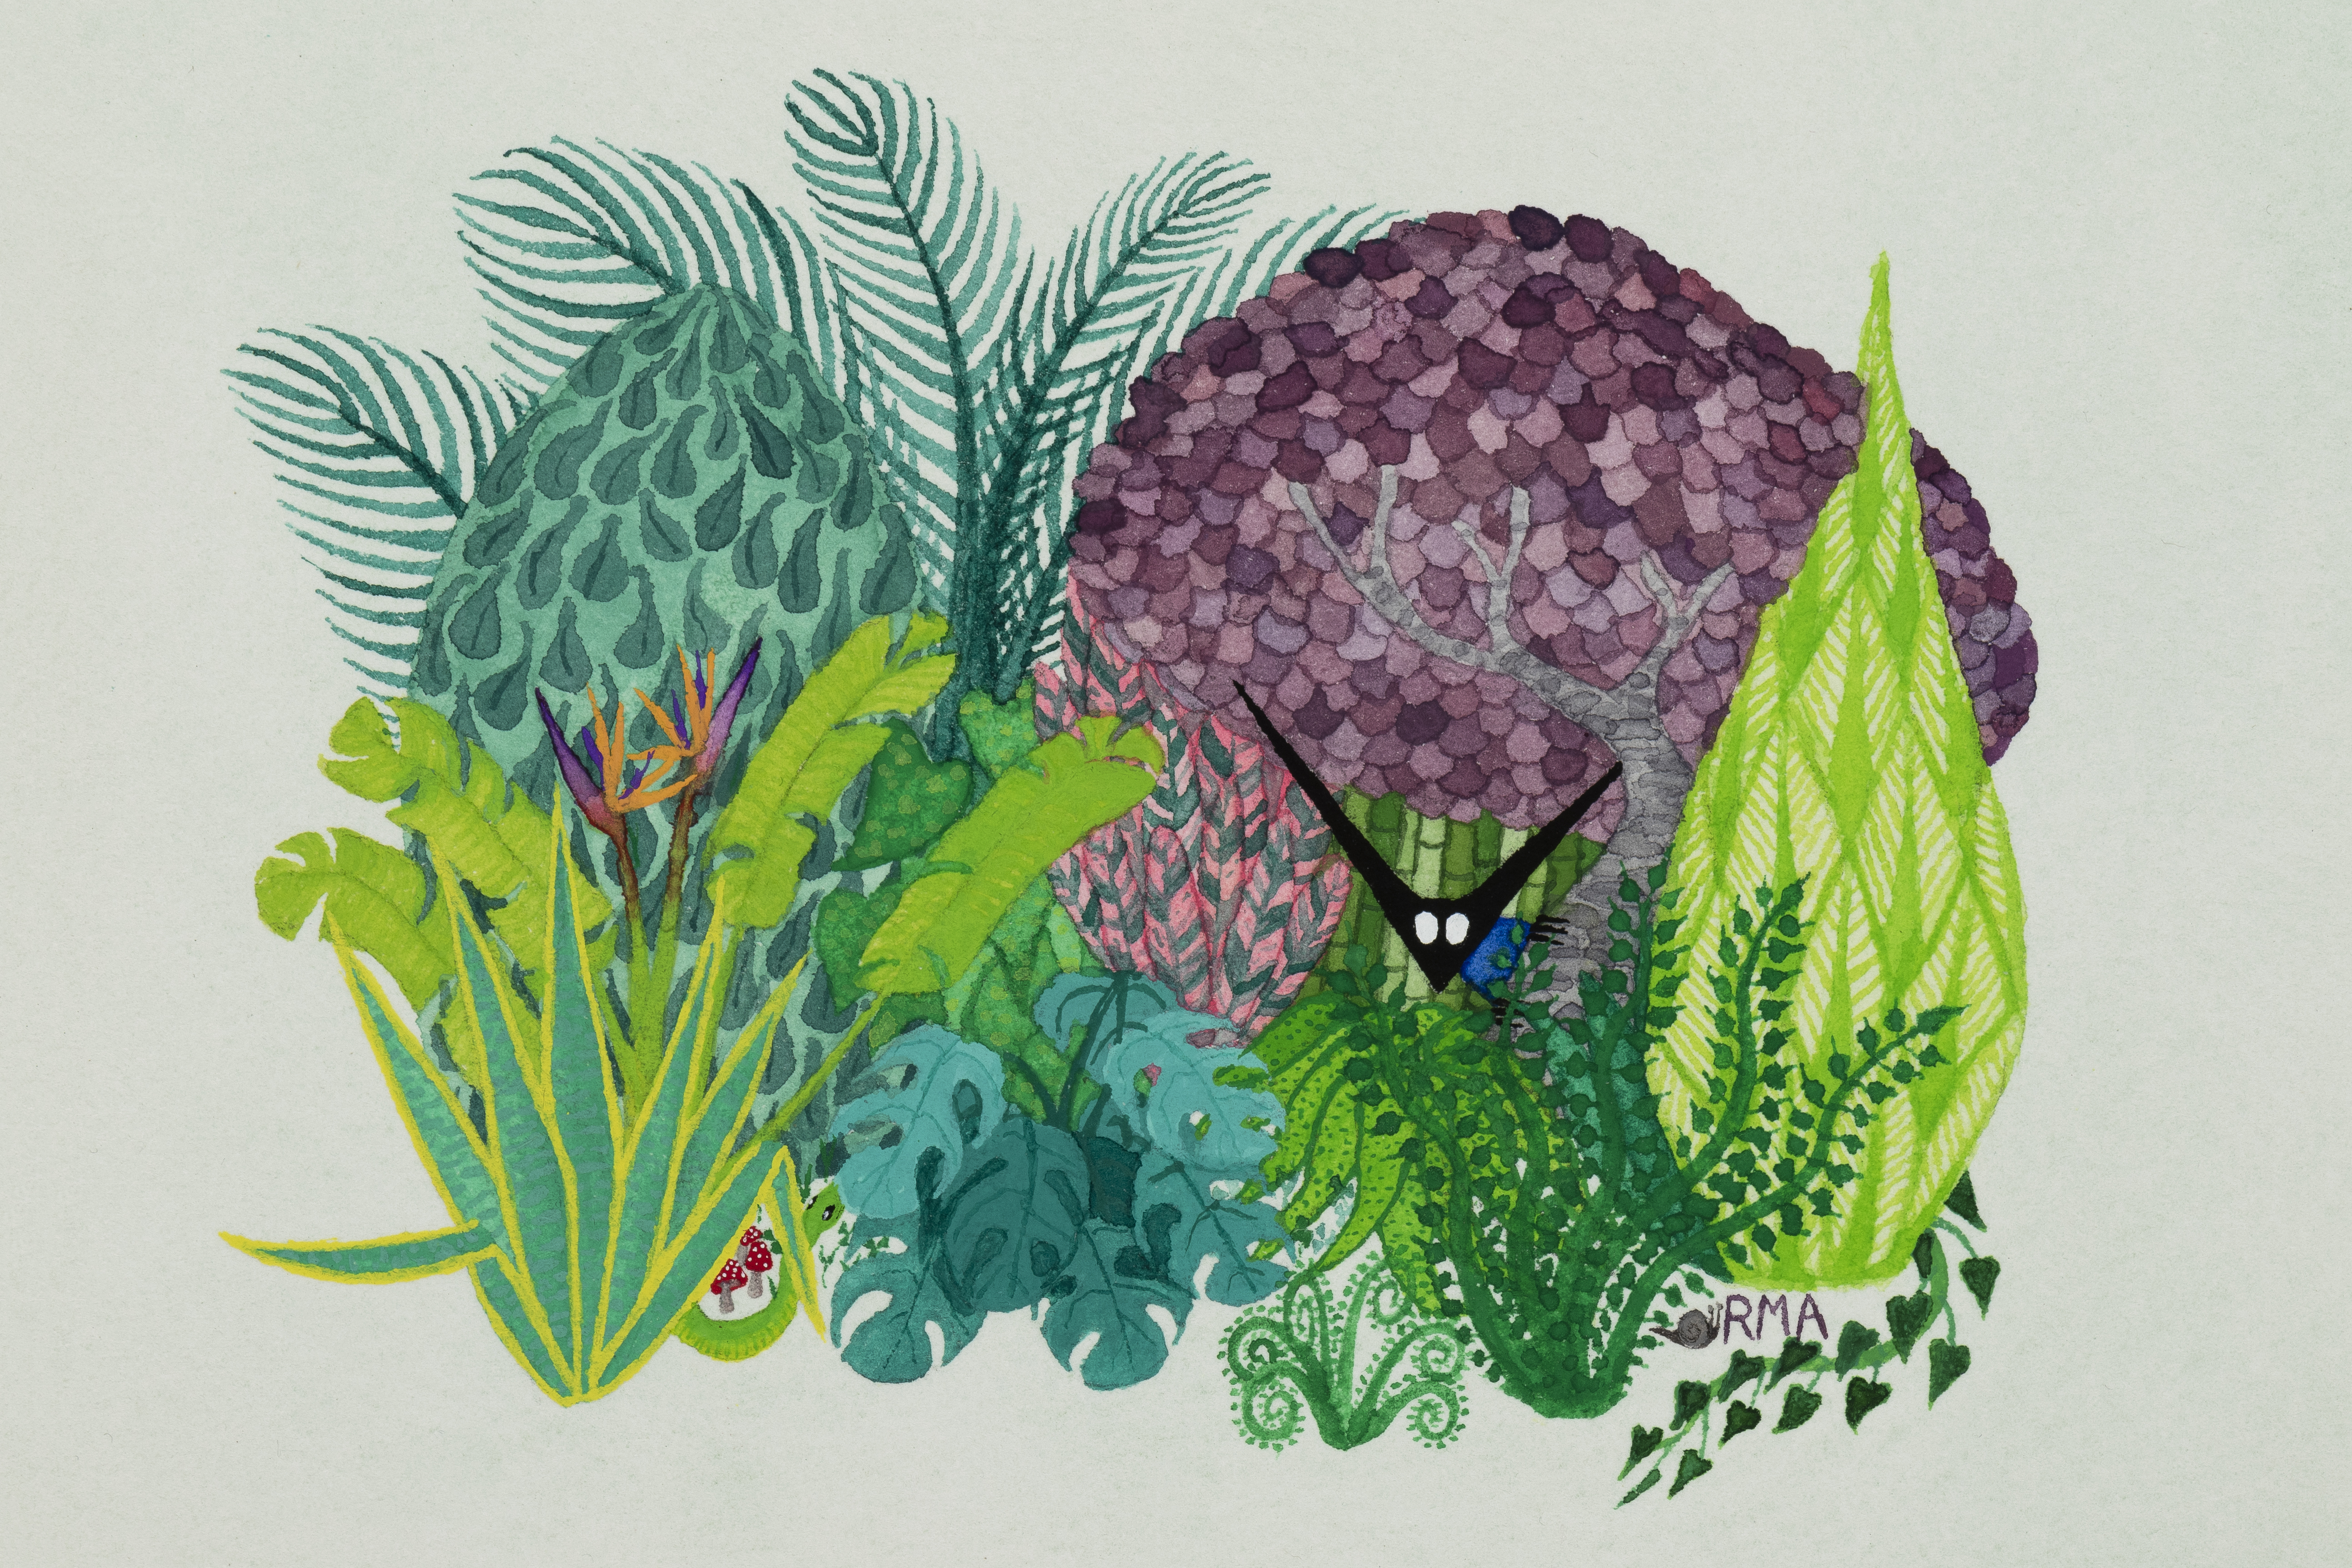 A masked creature peers out from behind the foliage in a lush jungle